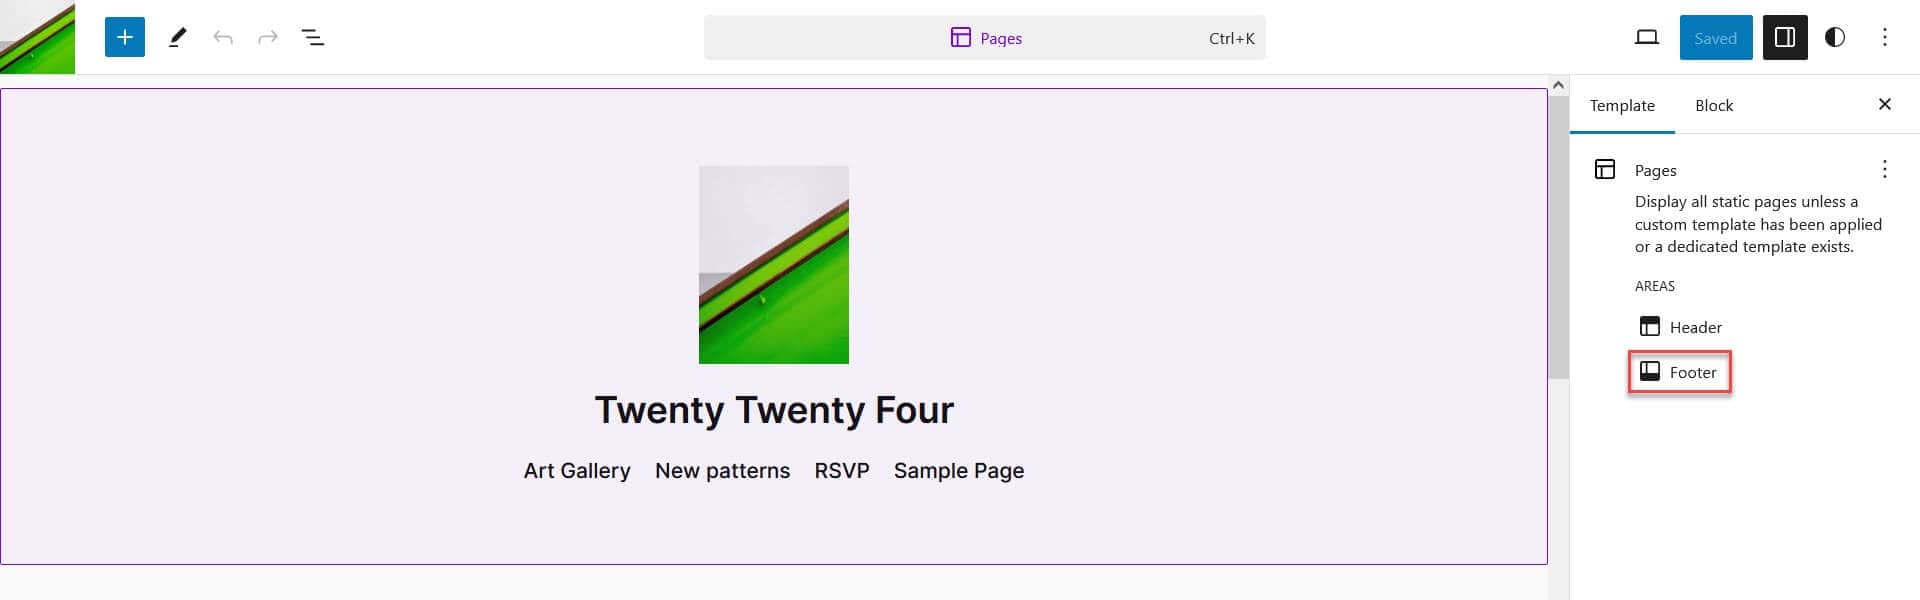 Twenty Twenty Four select footer to replaces on Pages template